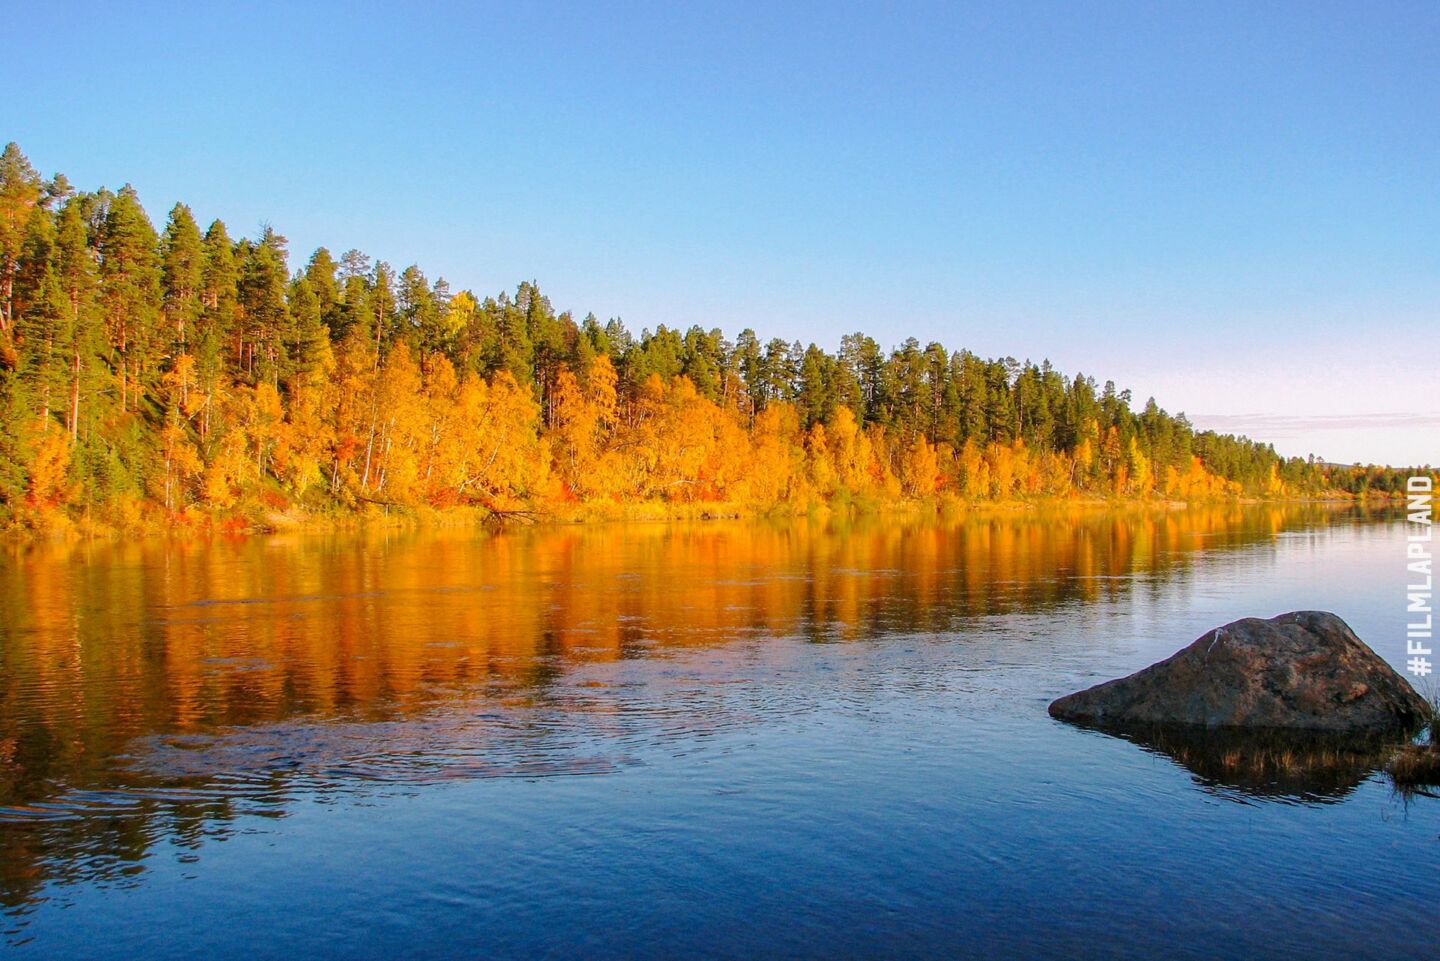 Autumn colors in Inari, a feature of filming in Finnish Lapland locations